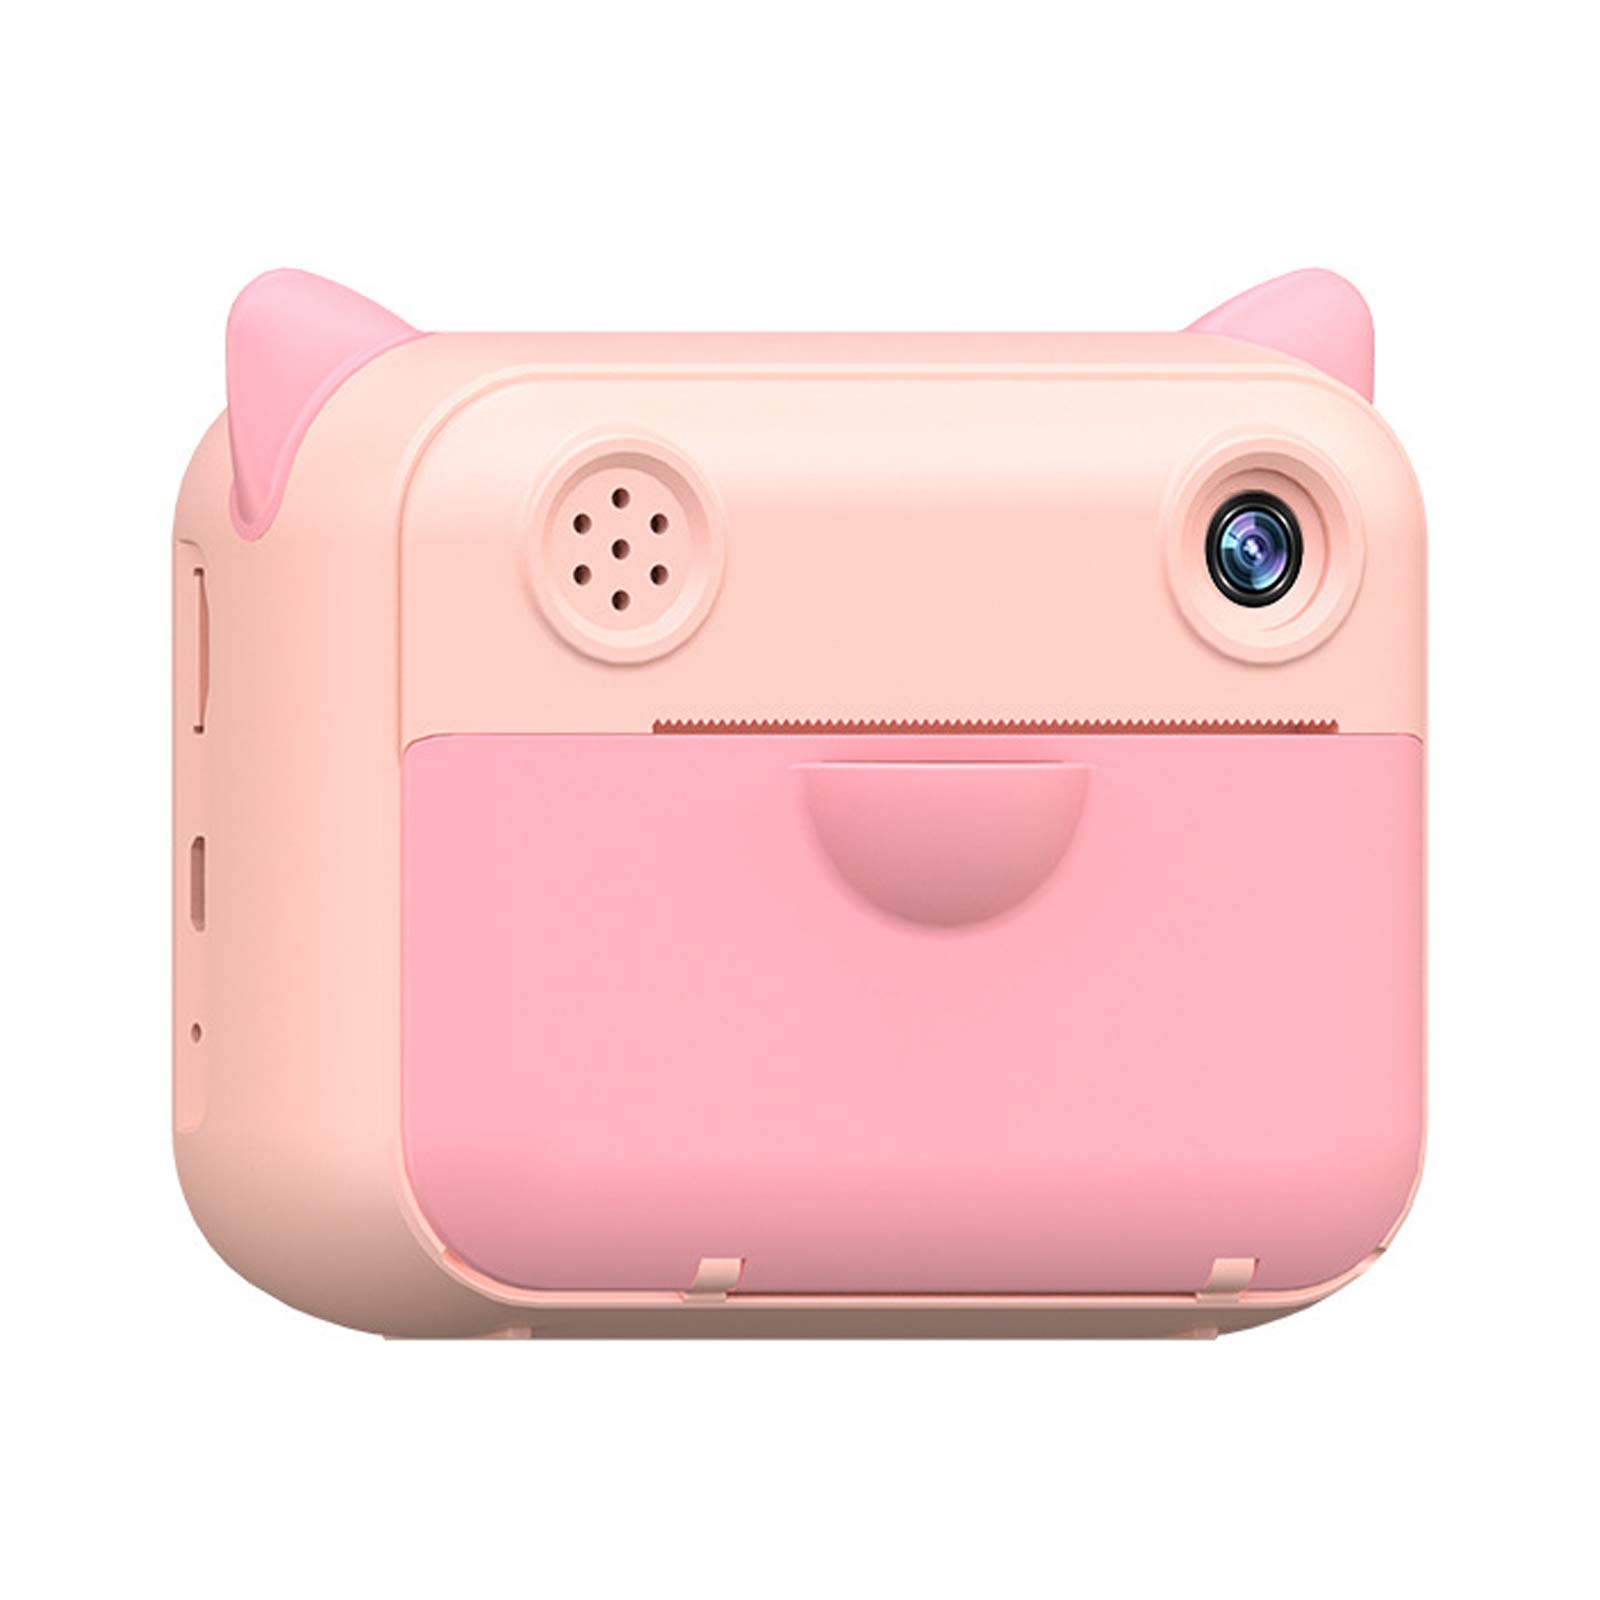 Wgwioo Kids Camera, Instant Print Camera, 1080P Digital Camera for Kids, Toy Camera Christmas Birthday Gifts for Girl Boy,Pink